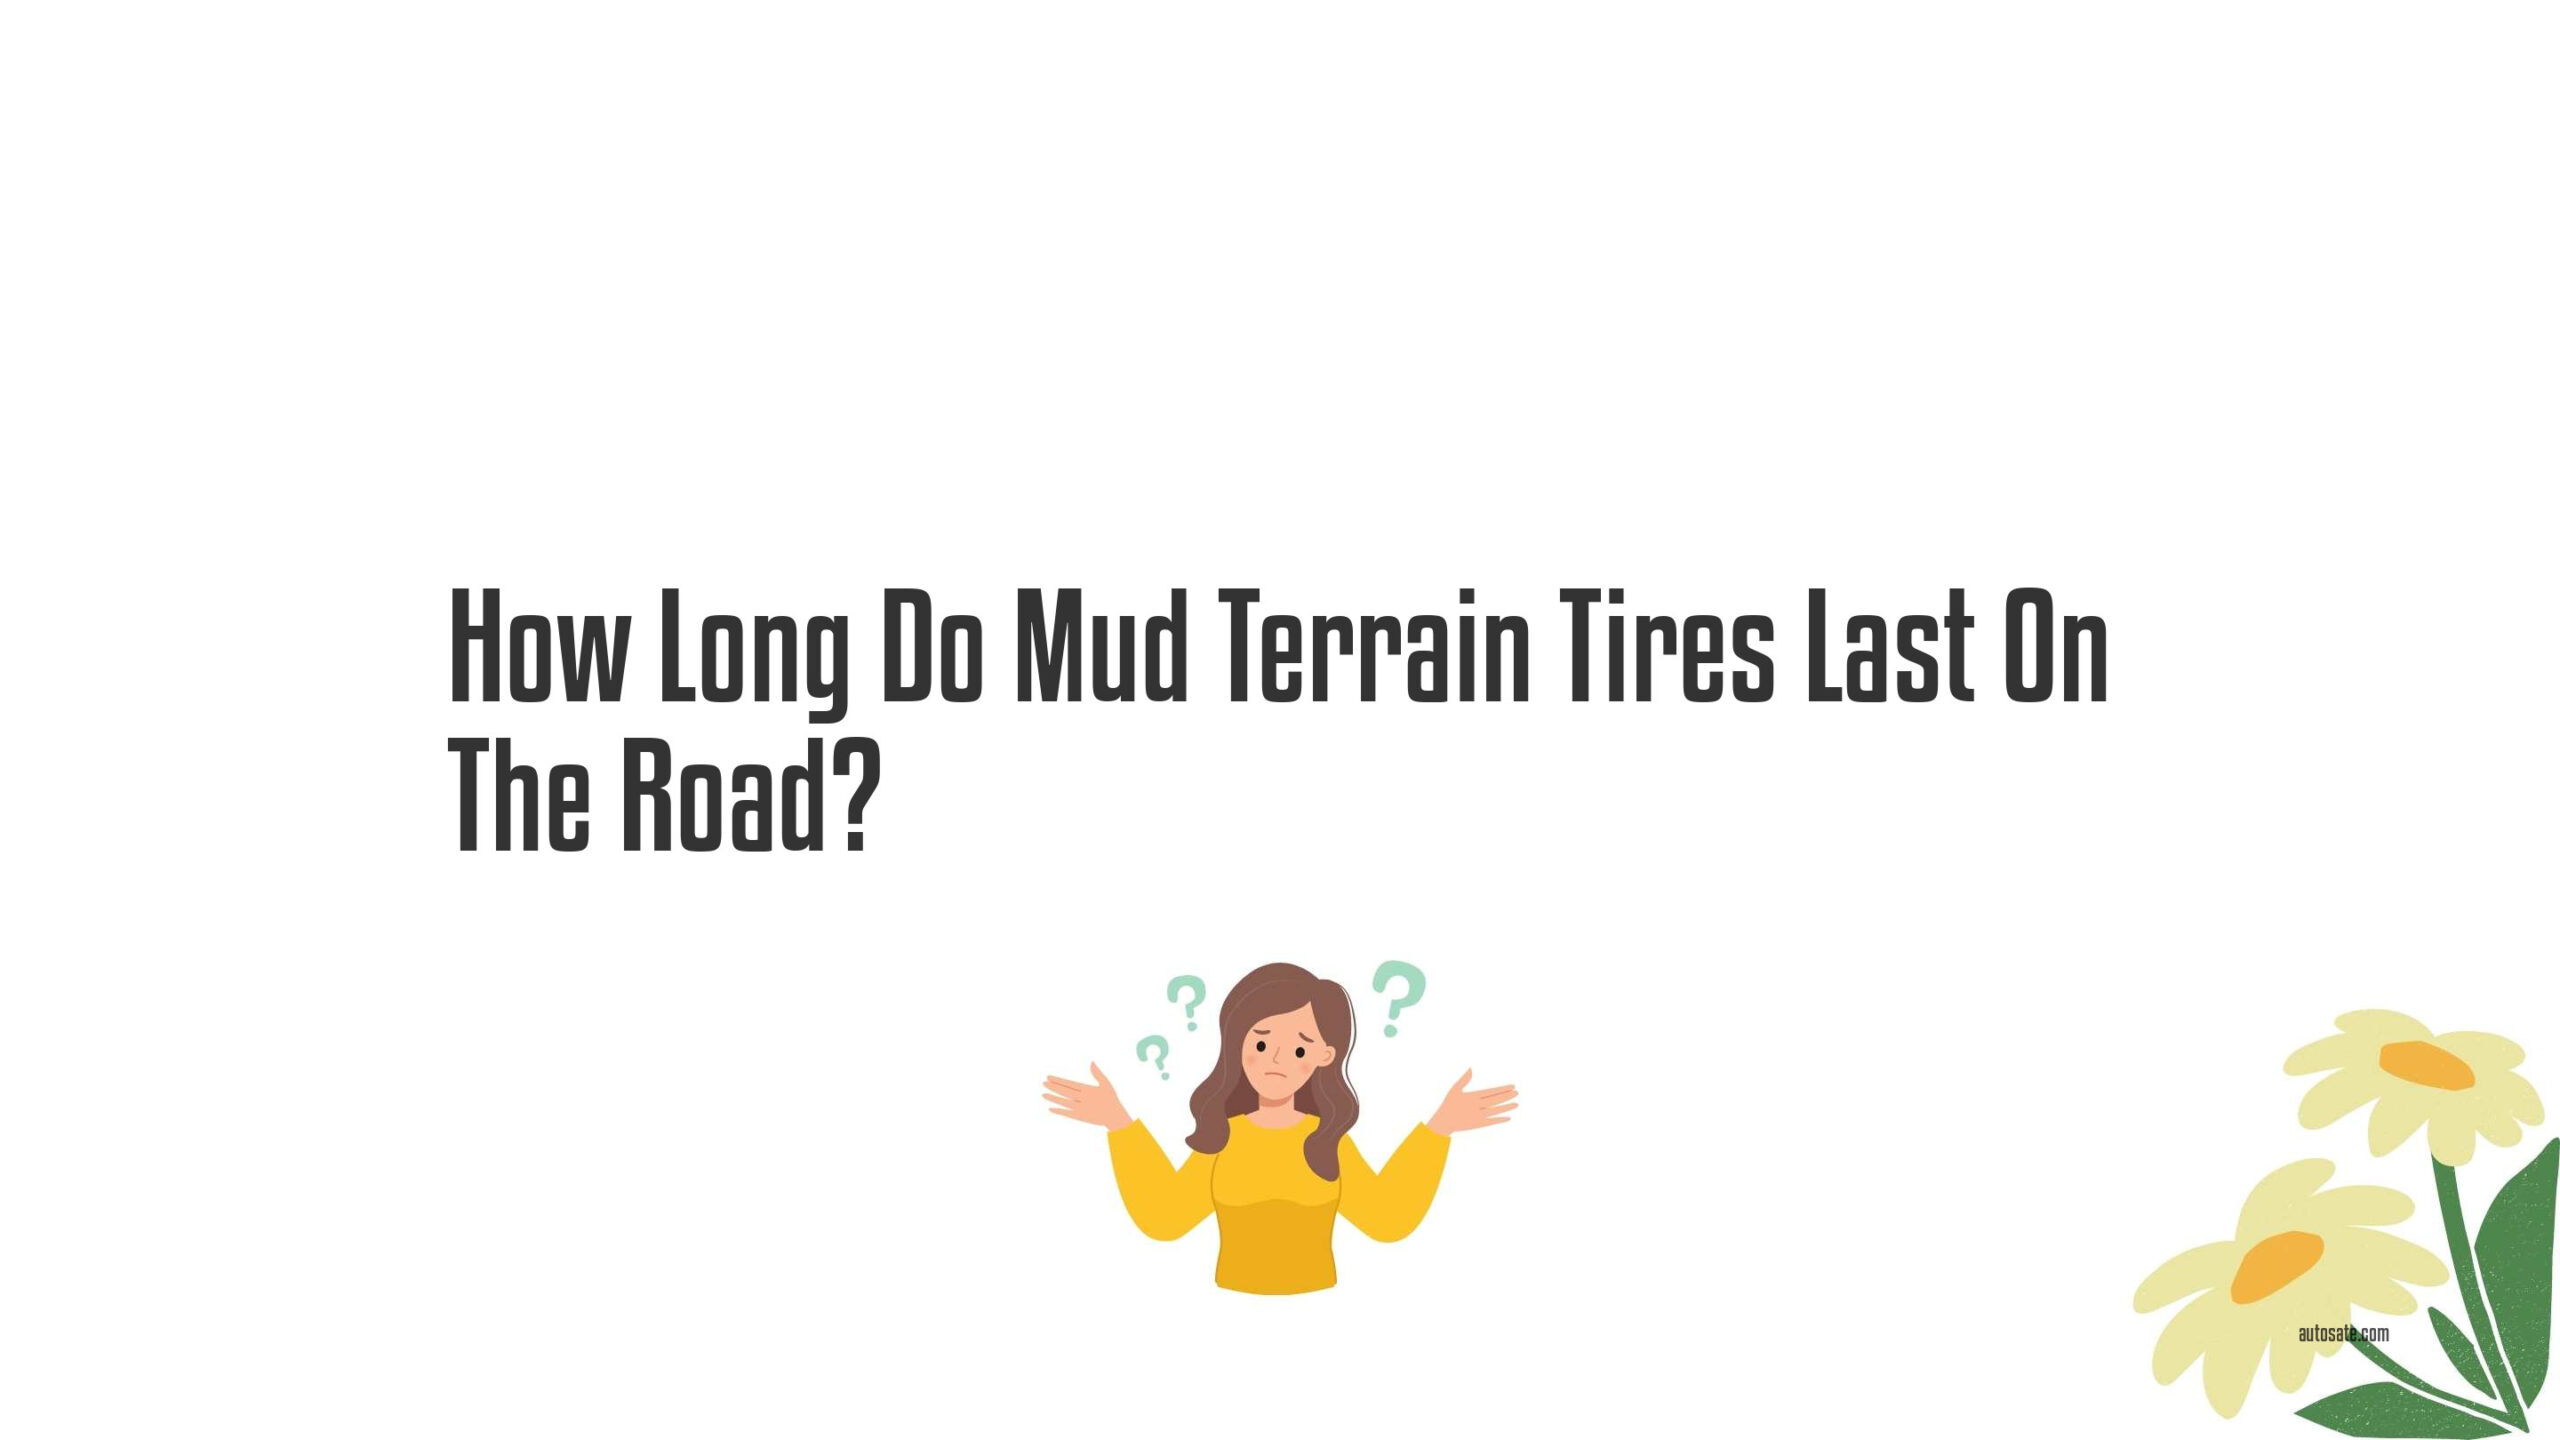 How Long Do Mud Terrain Tires Last On The Road?